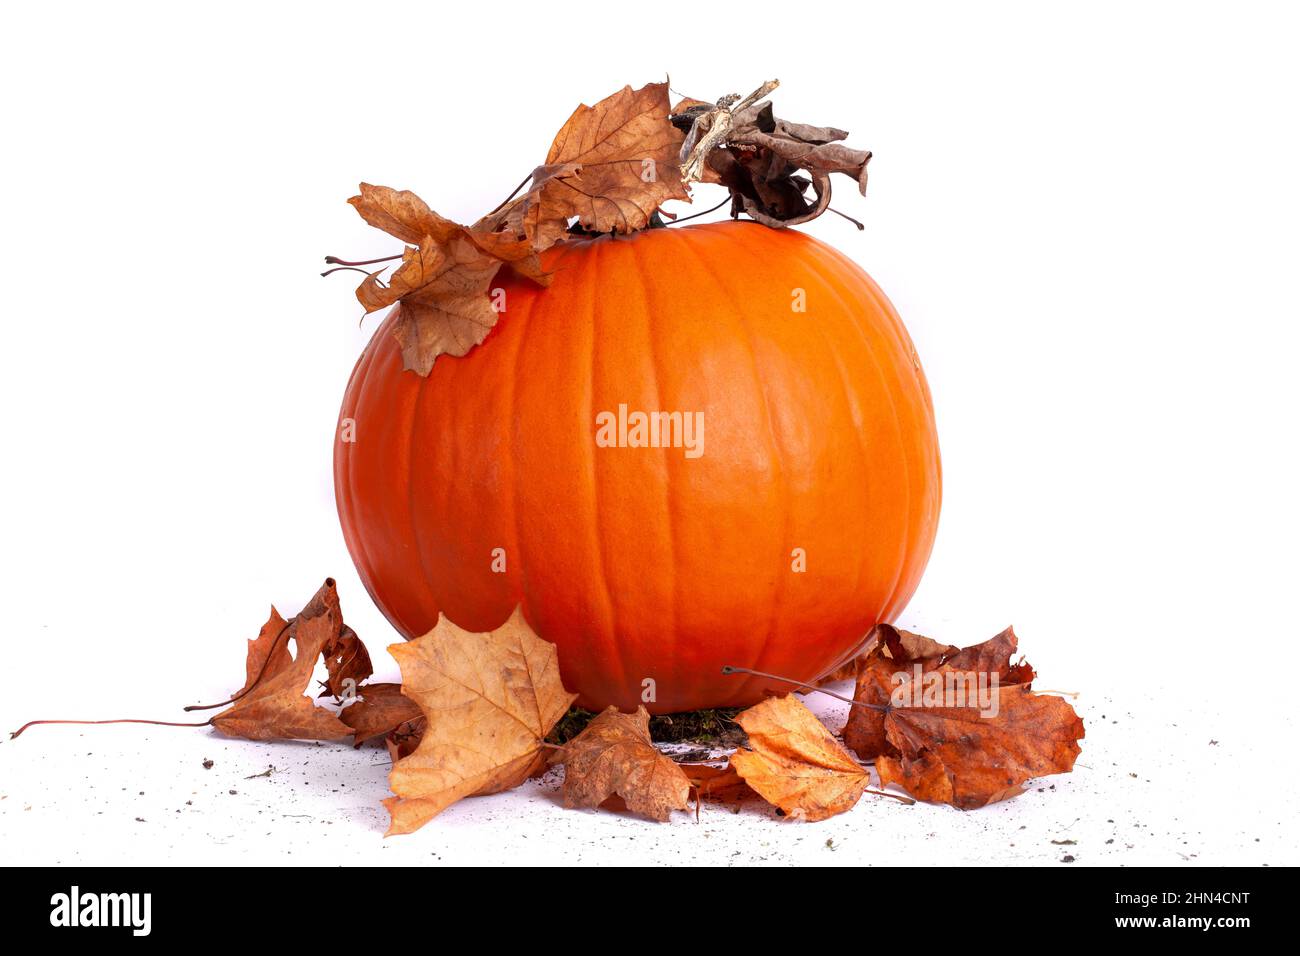 Halloween orange pumpkin with dried autumn leaves, isolated on white background studio image Stock Photo